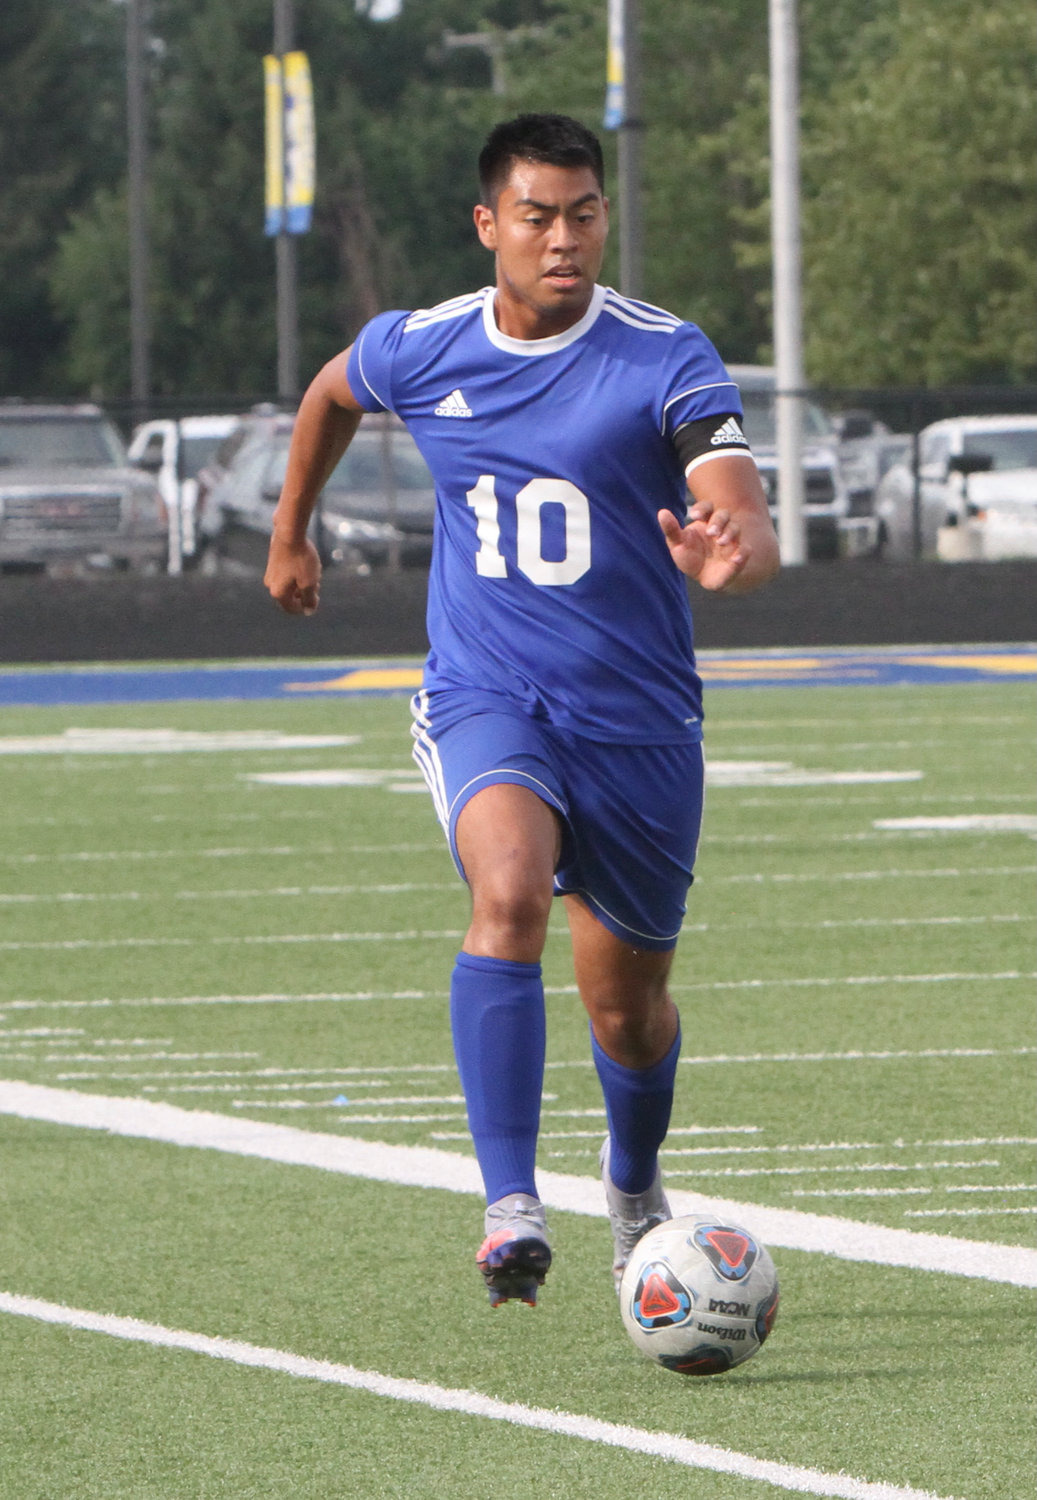 Yeison Cifuentes, who primarily plays defense for the Athenians got in on the scoring action with a late goal.